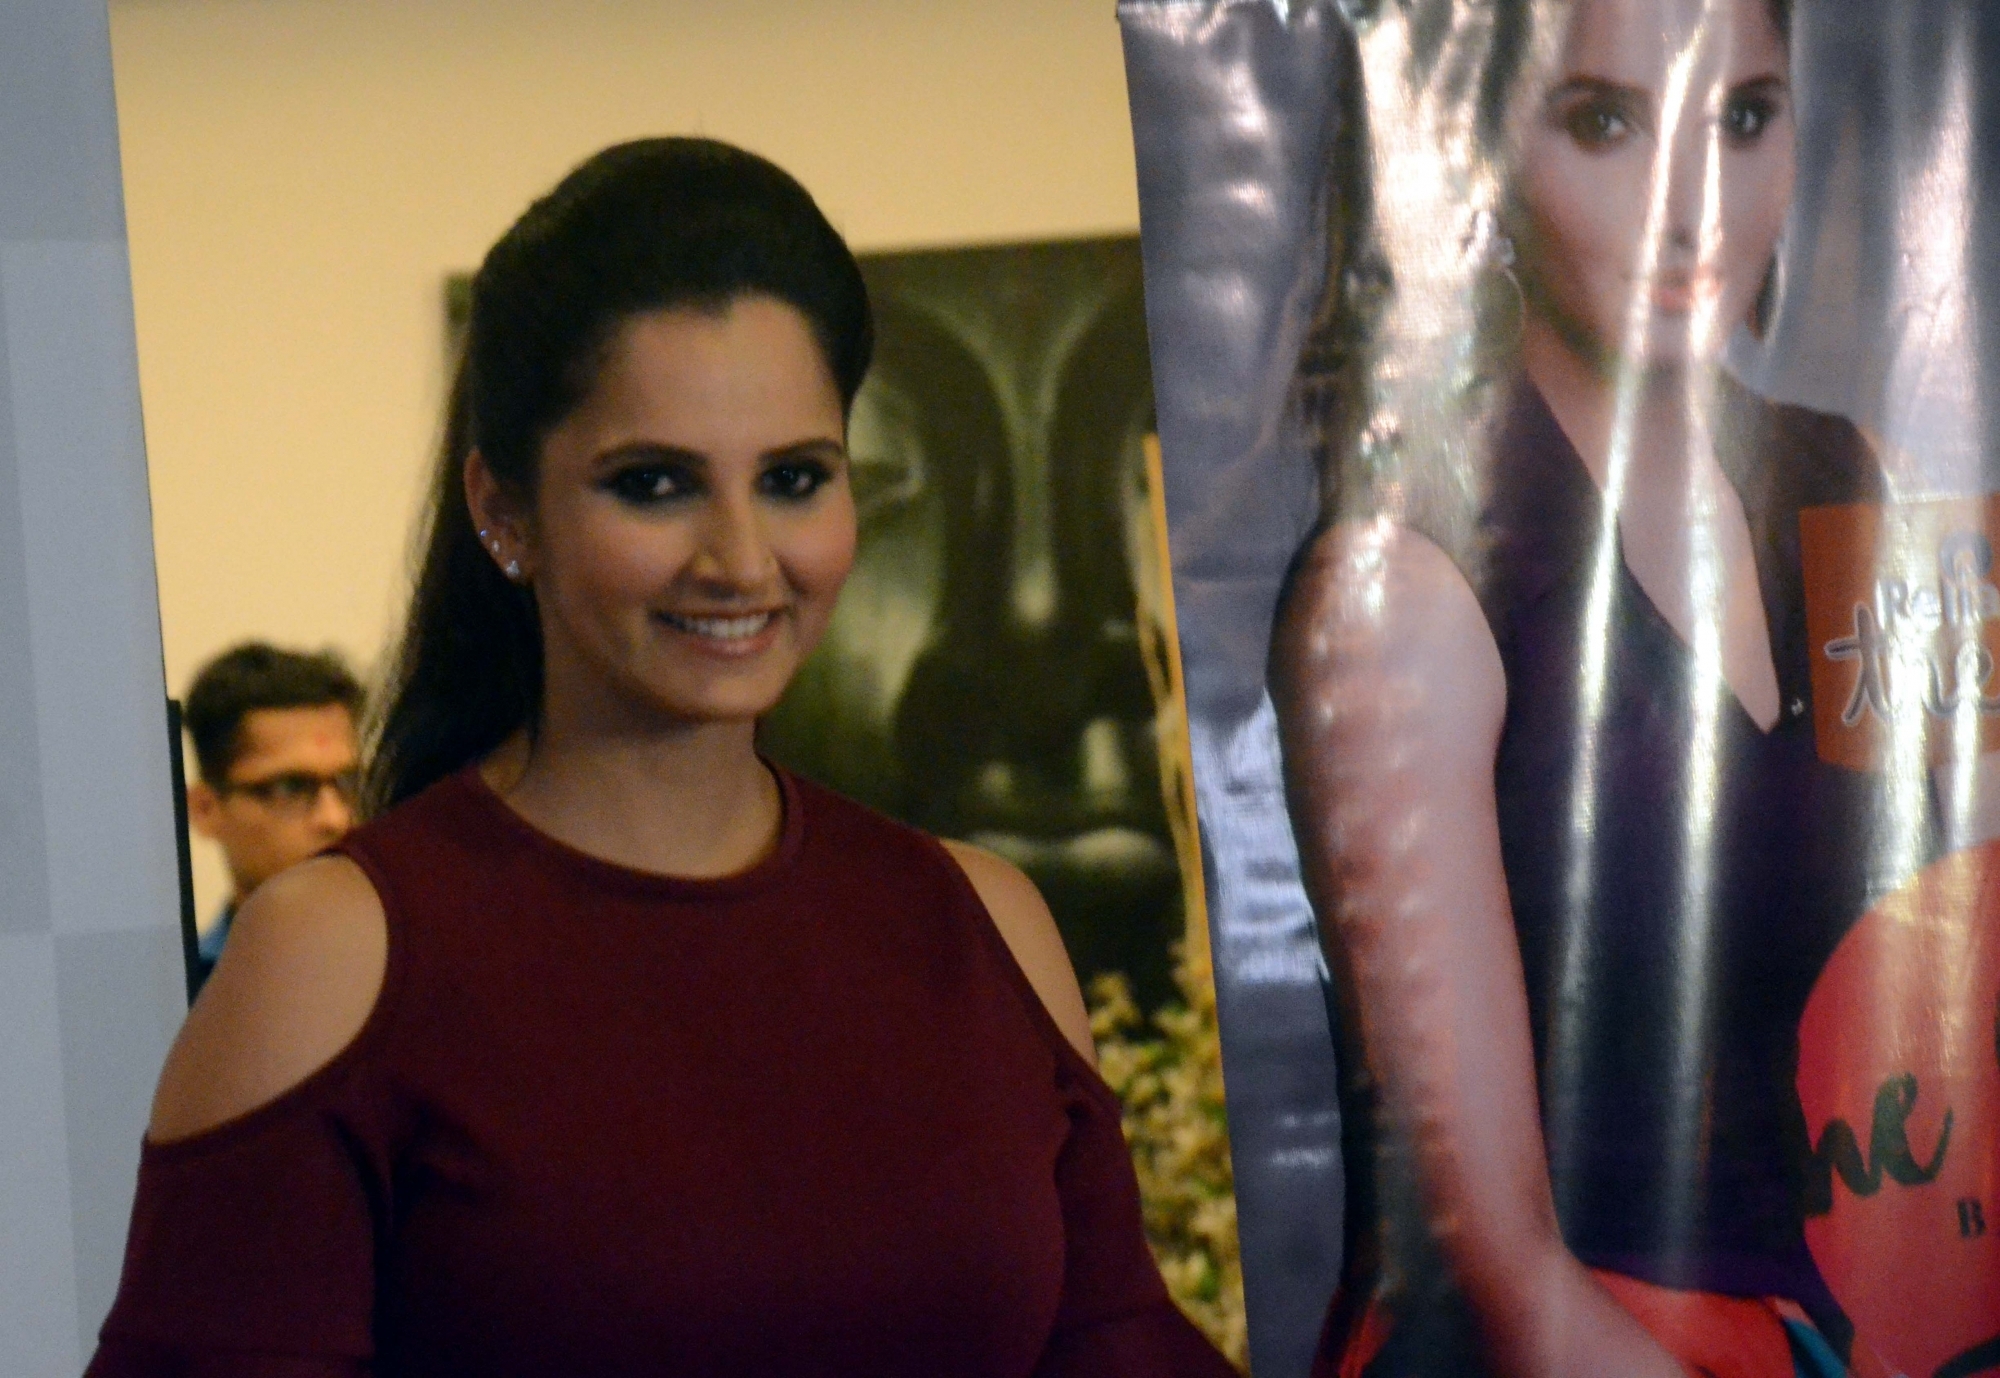 I associate with brands I believe in, says Sania Mirza